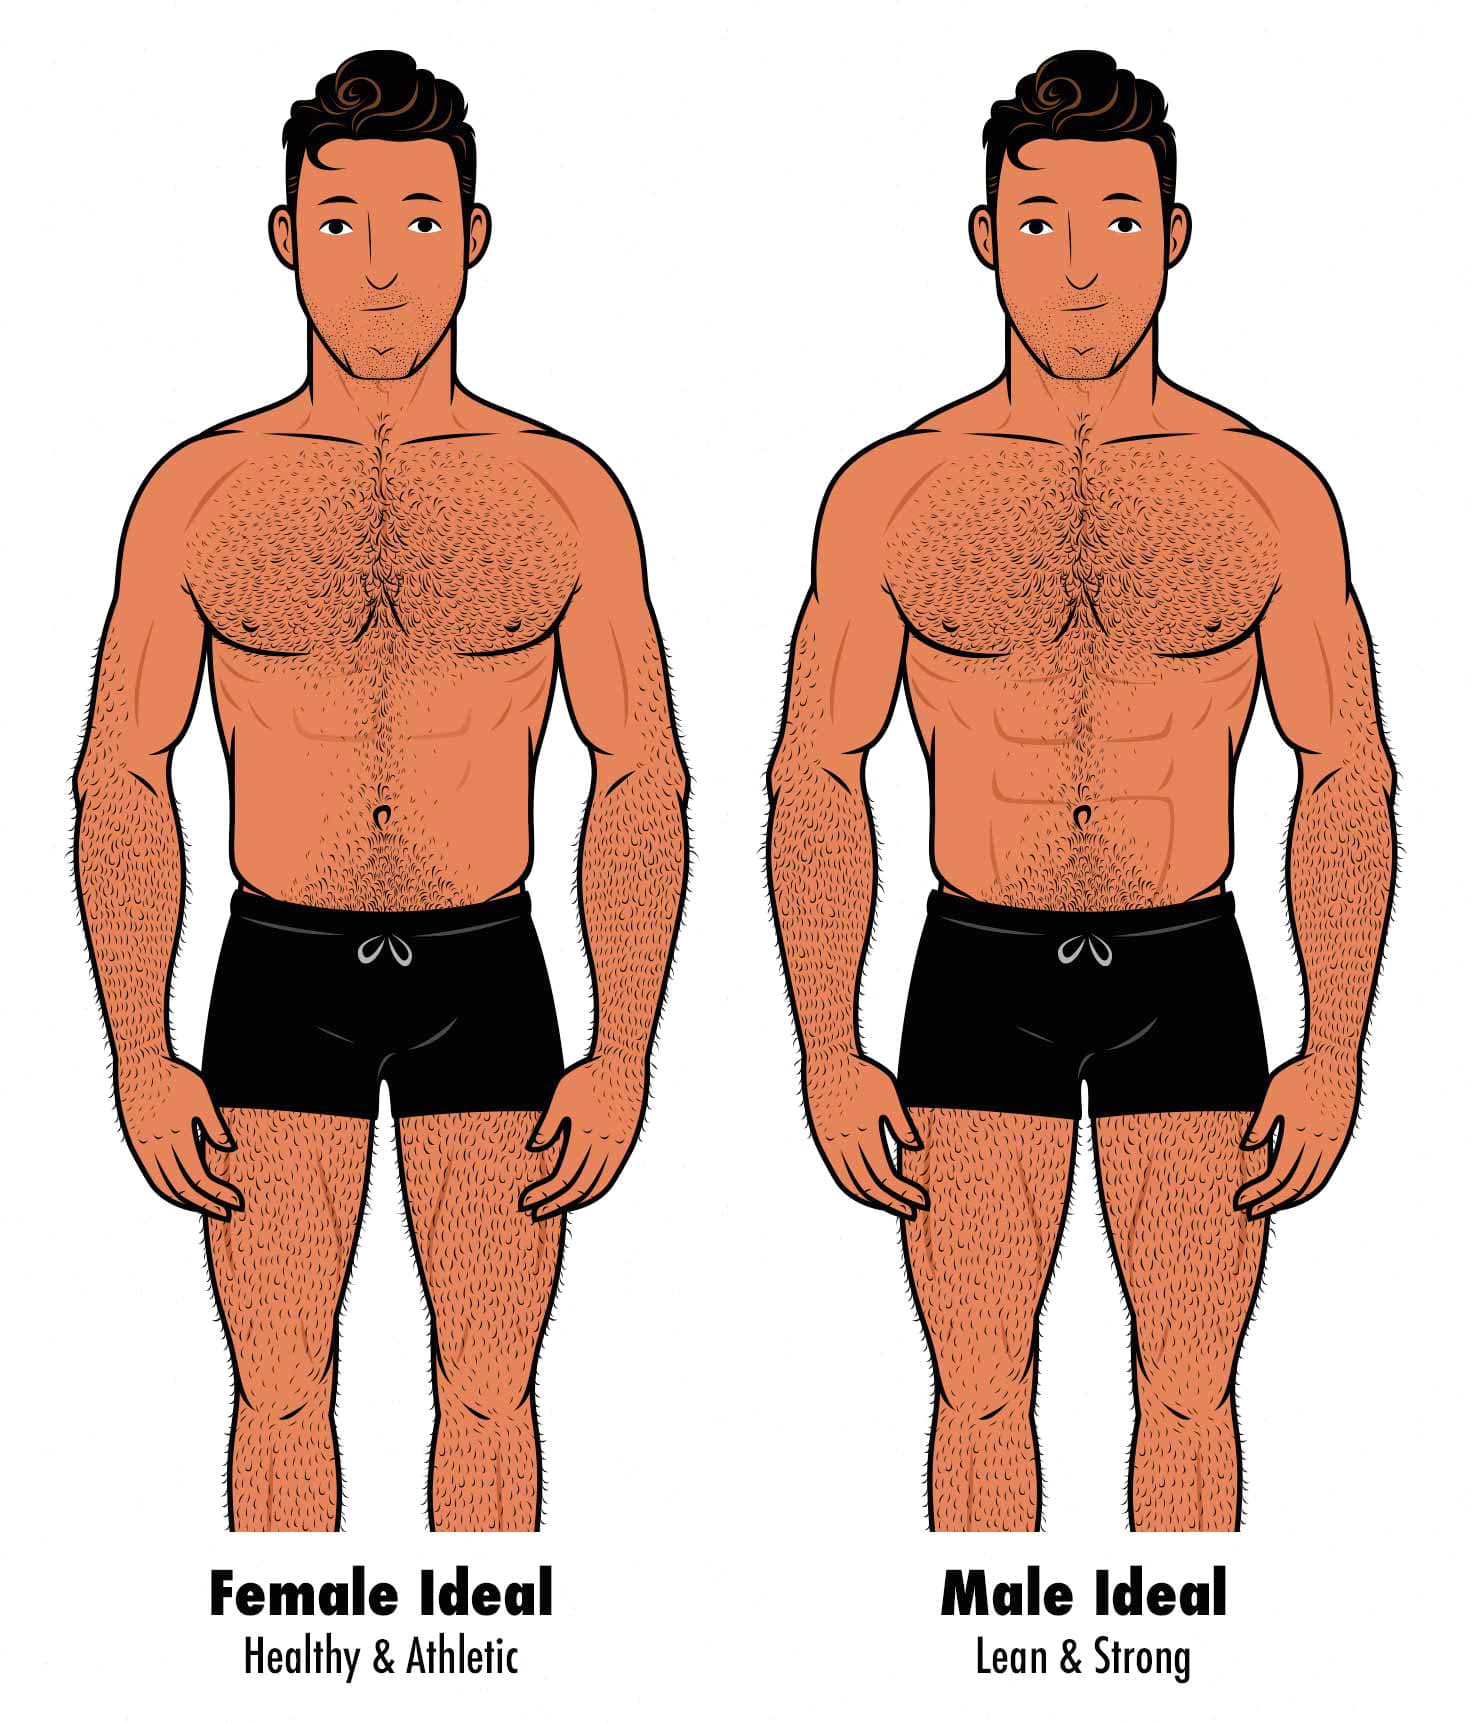 Illustration showing the bodies rated as most attractive by women and ideal by men.